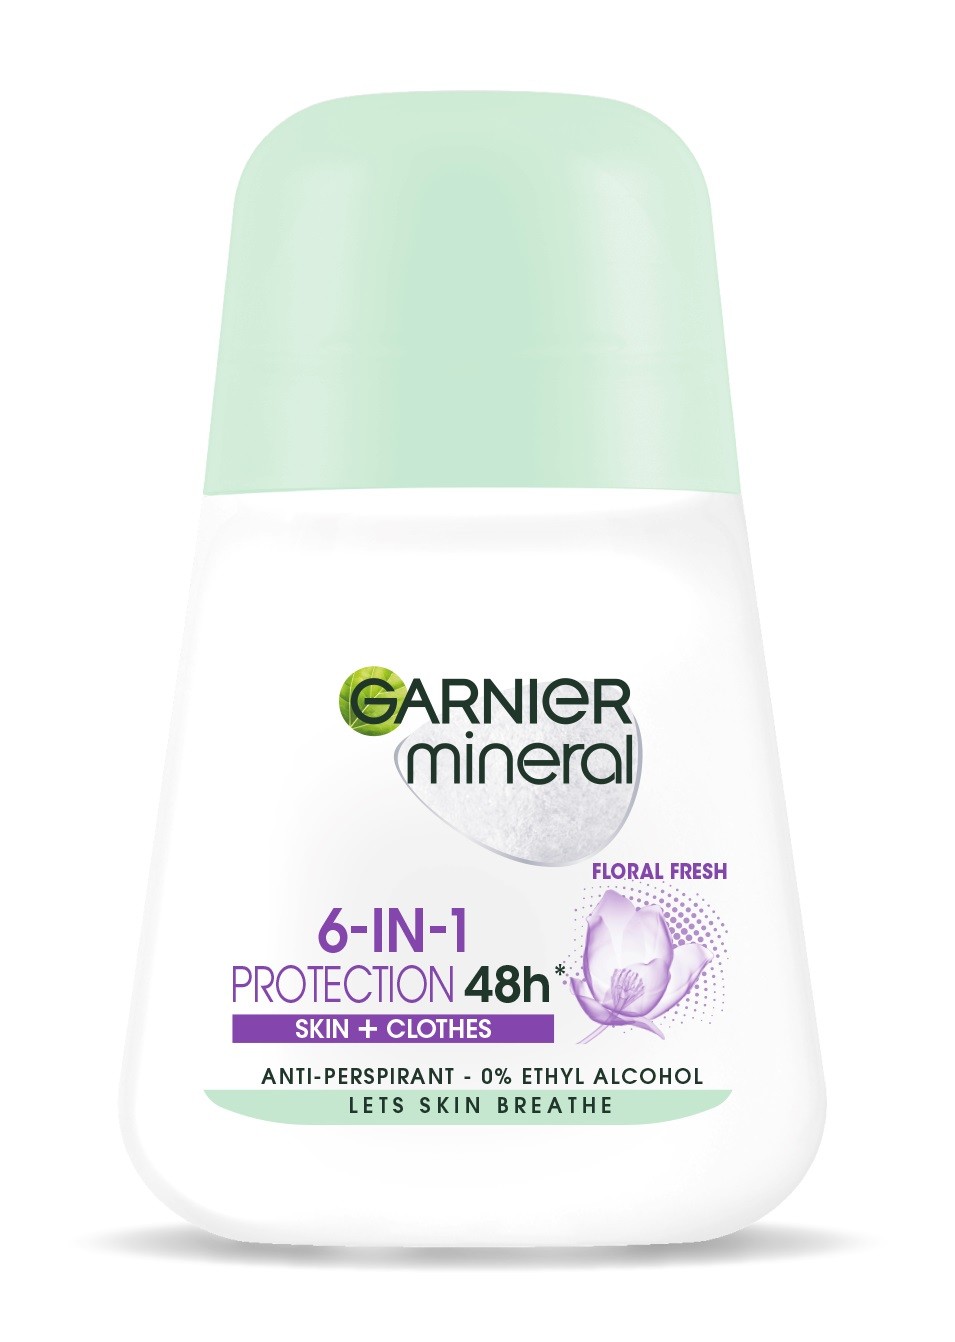 Garnier Mineral Dezodorant roll-on 6in1 Protection 48h Floral Fresh - Skin+Clothes   50ml